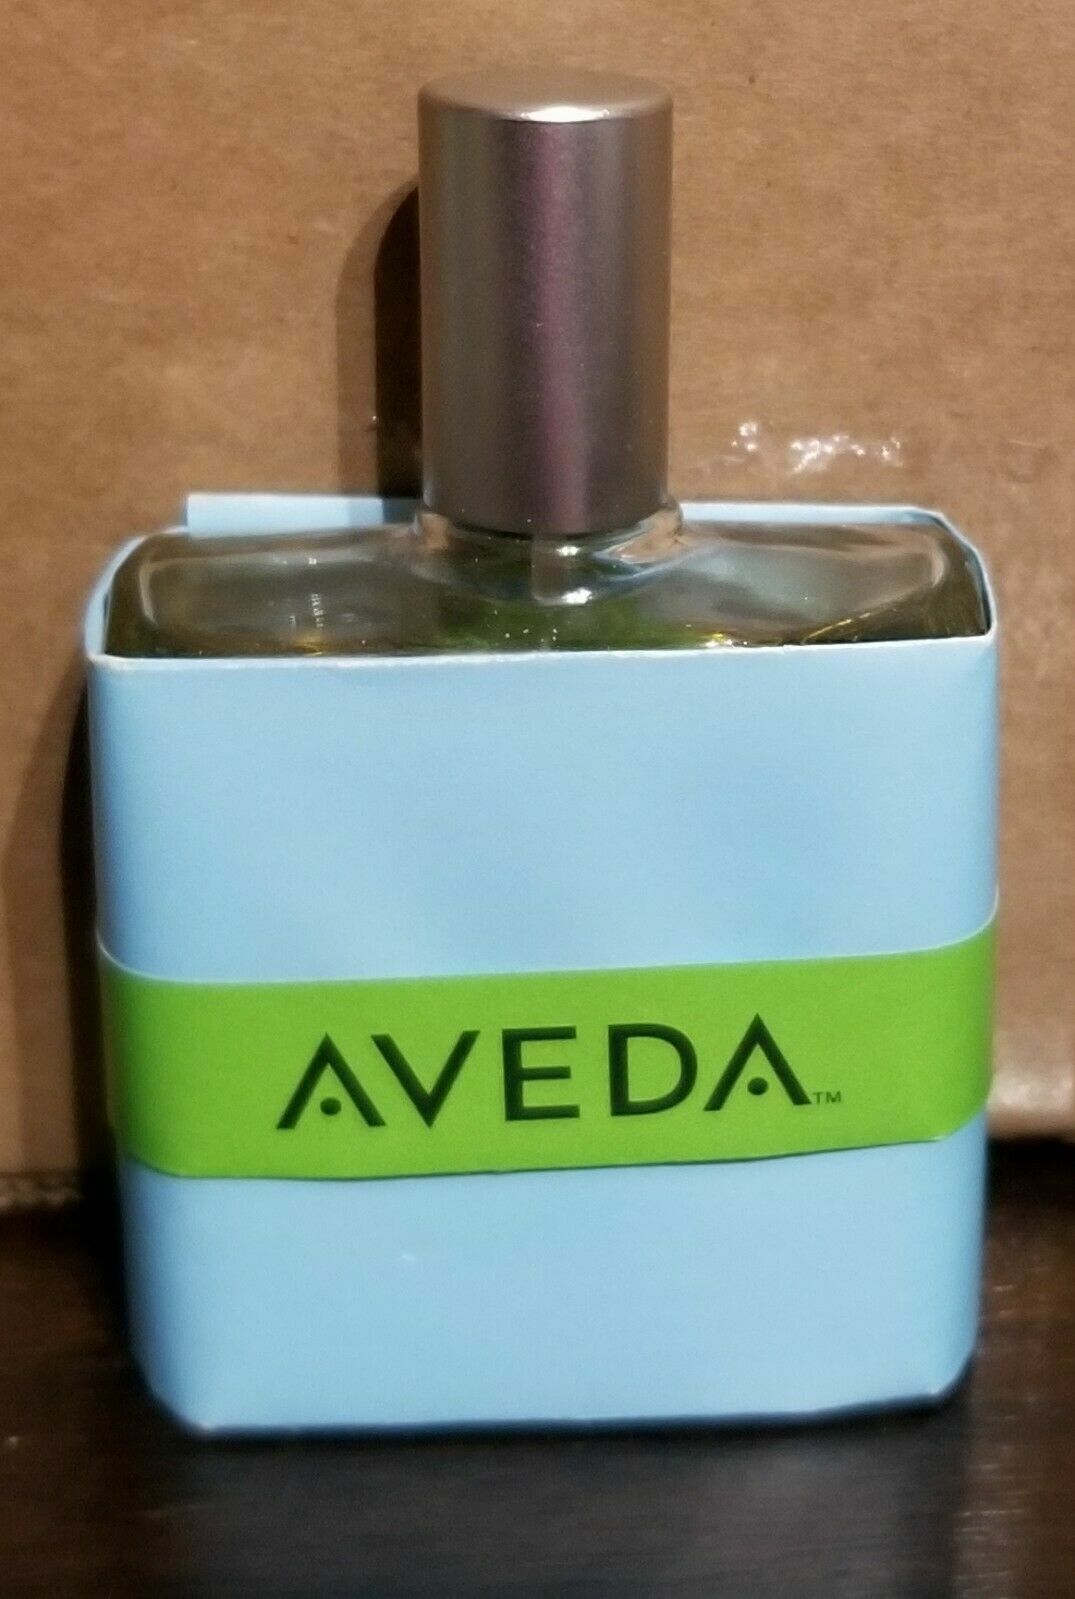 AVEDA JOSHUA TREE ABSOLUTE DESERT PURE-FUME AROMA CONCENTRATE 1.7 oz New